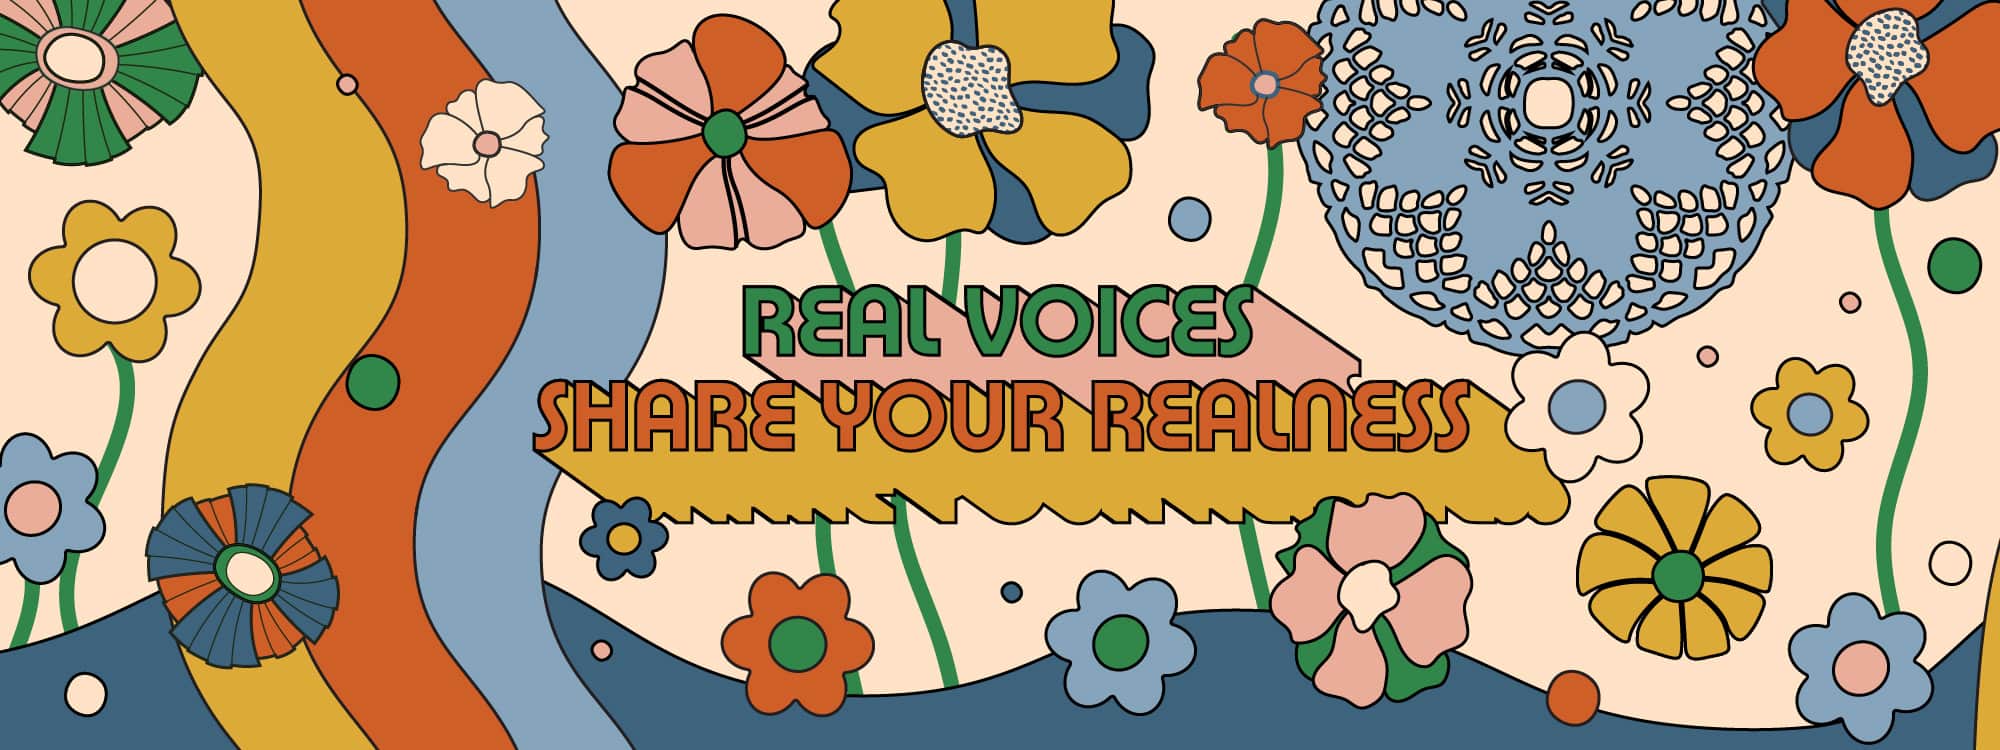 Real voices. Share your realness.